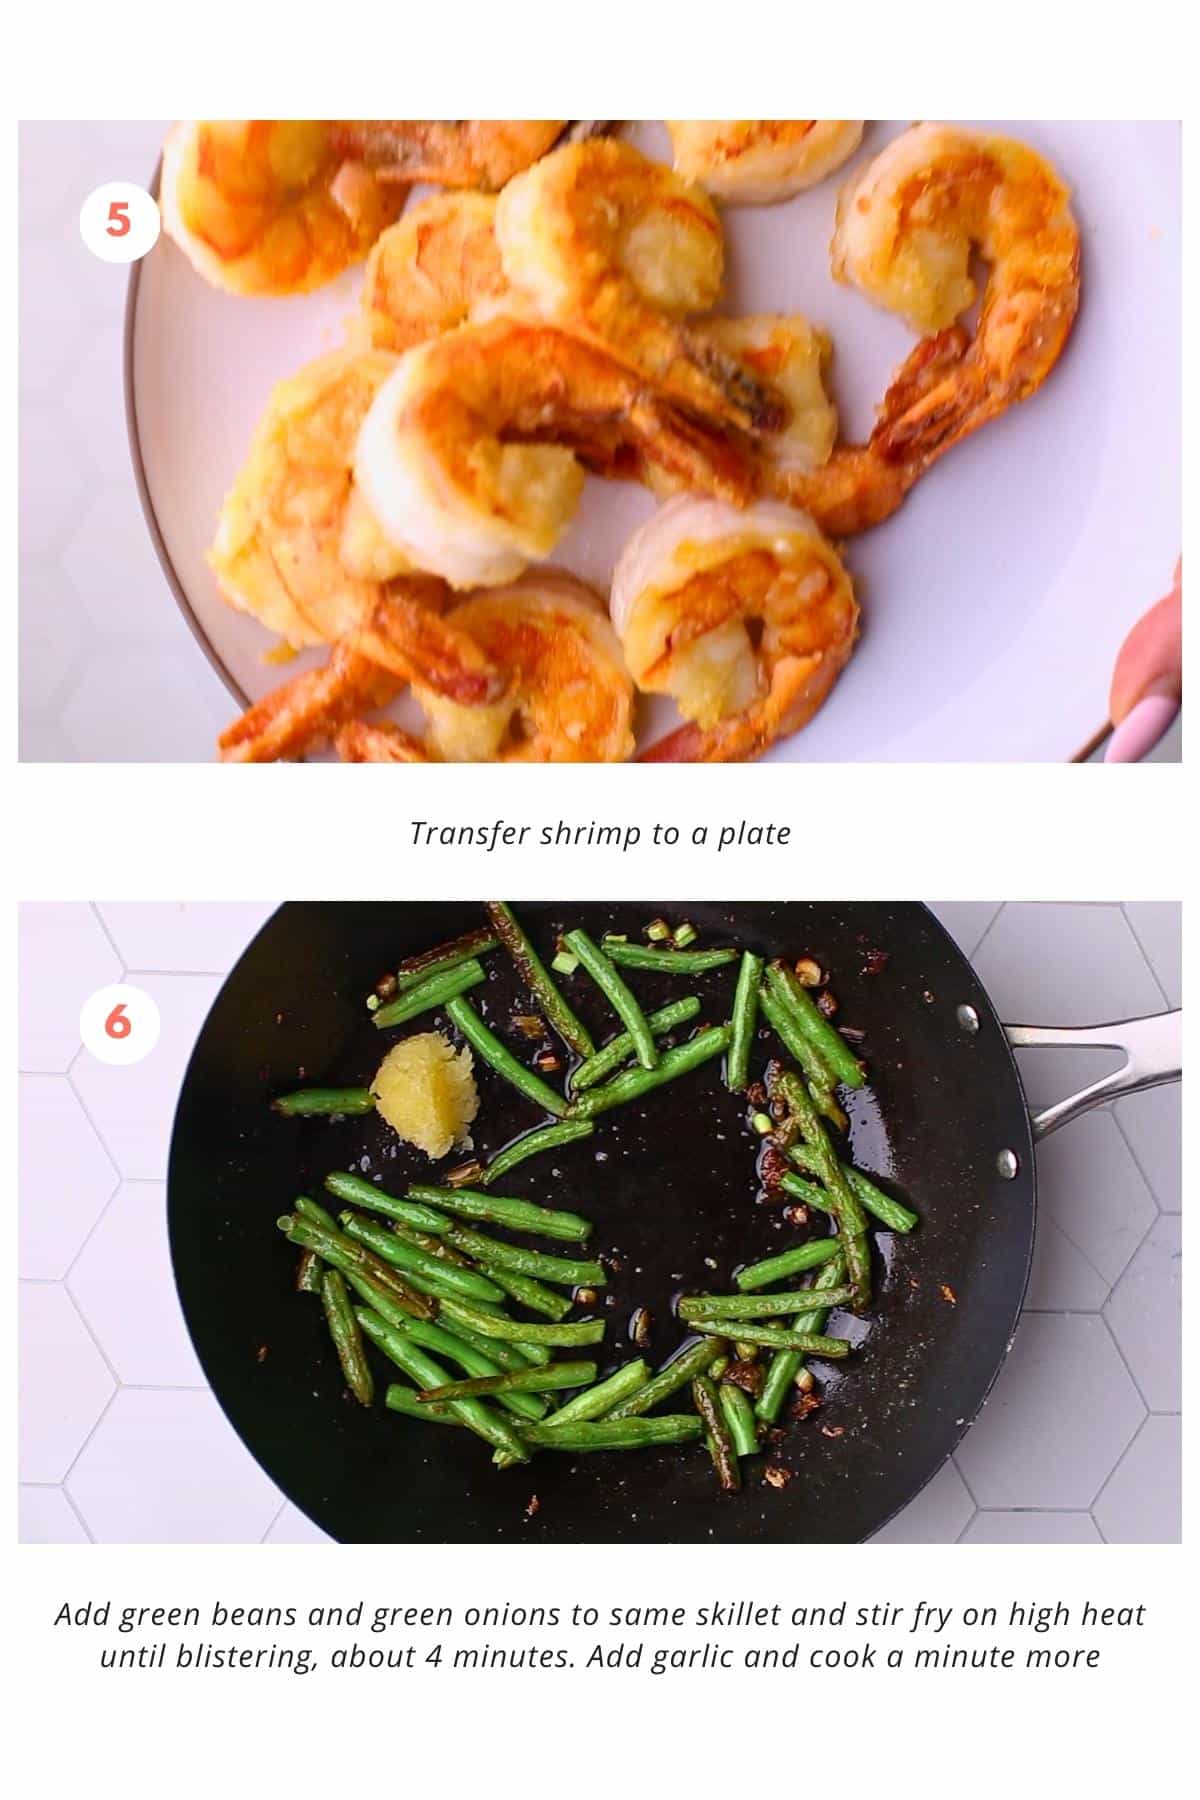 Shrimp transferred to a plate. Green beans and green onions added to the same skillet and stir-fried on high heat until blistering, approximately 4 minutes. Garlic added and cooked for an additional minute.